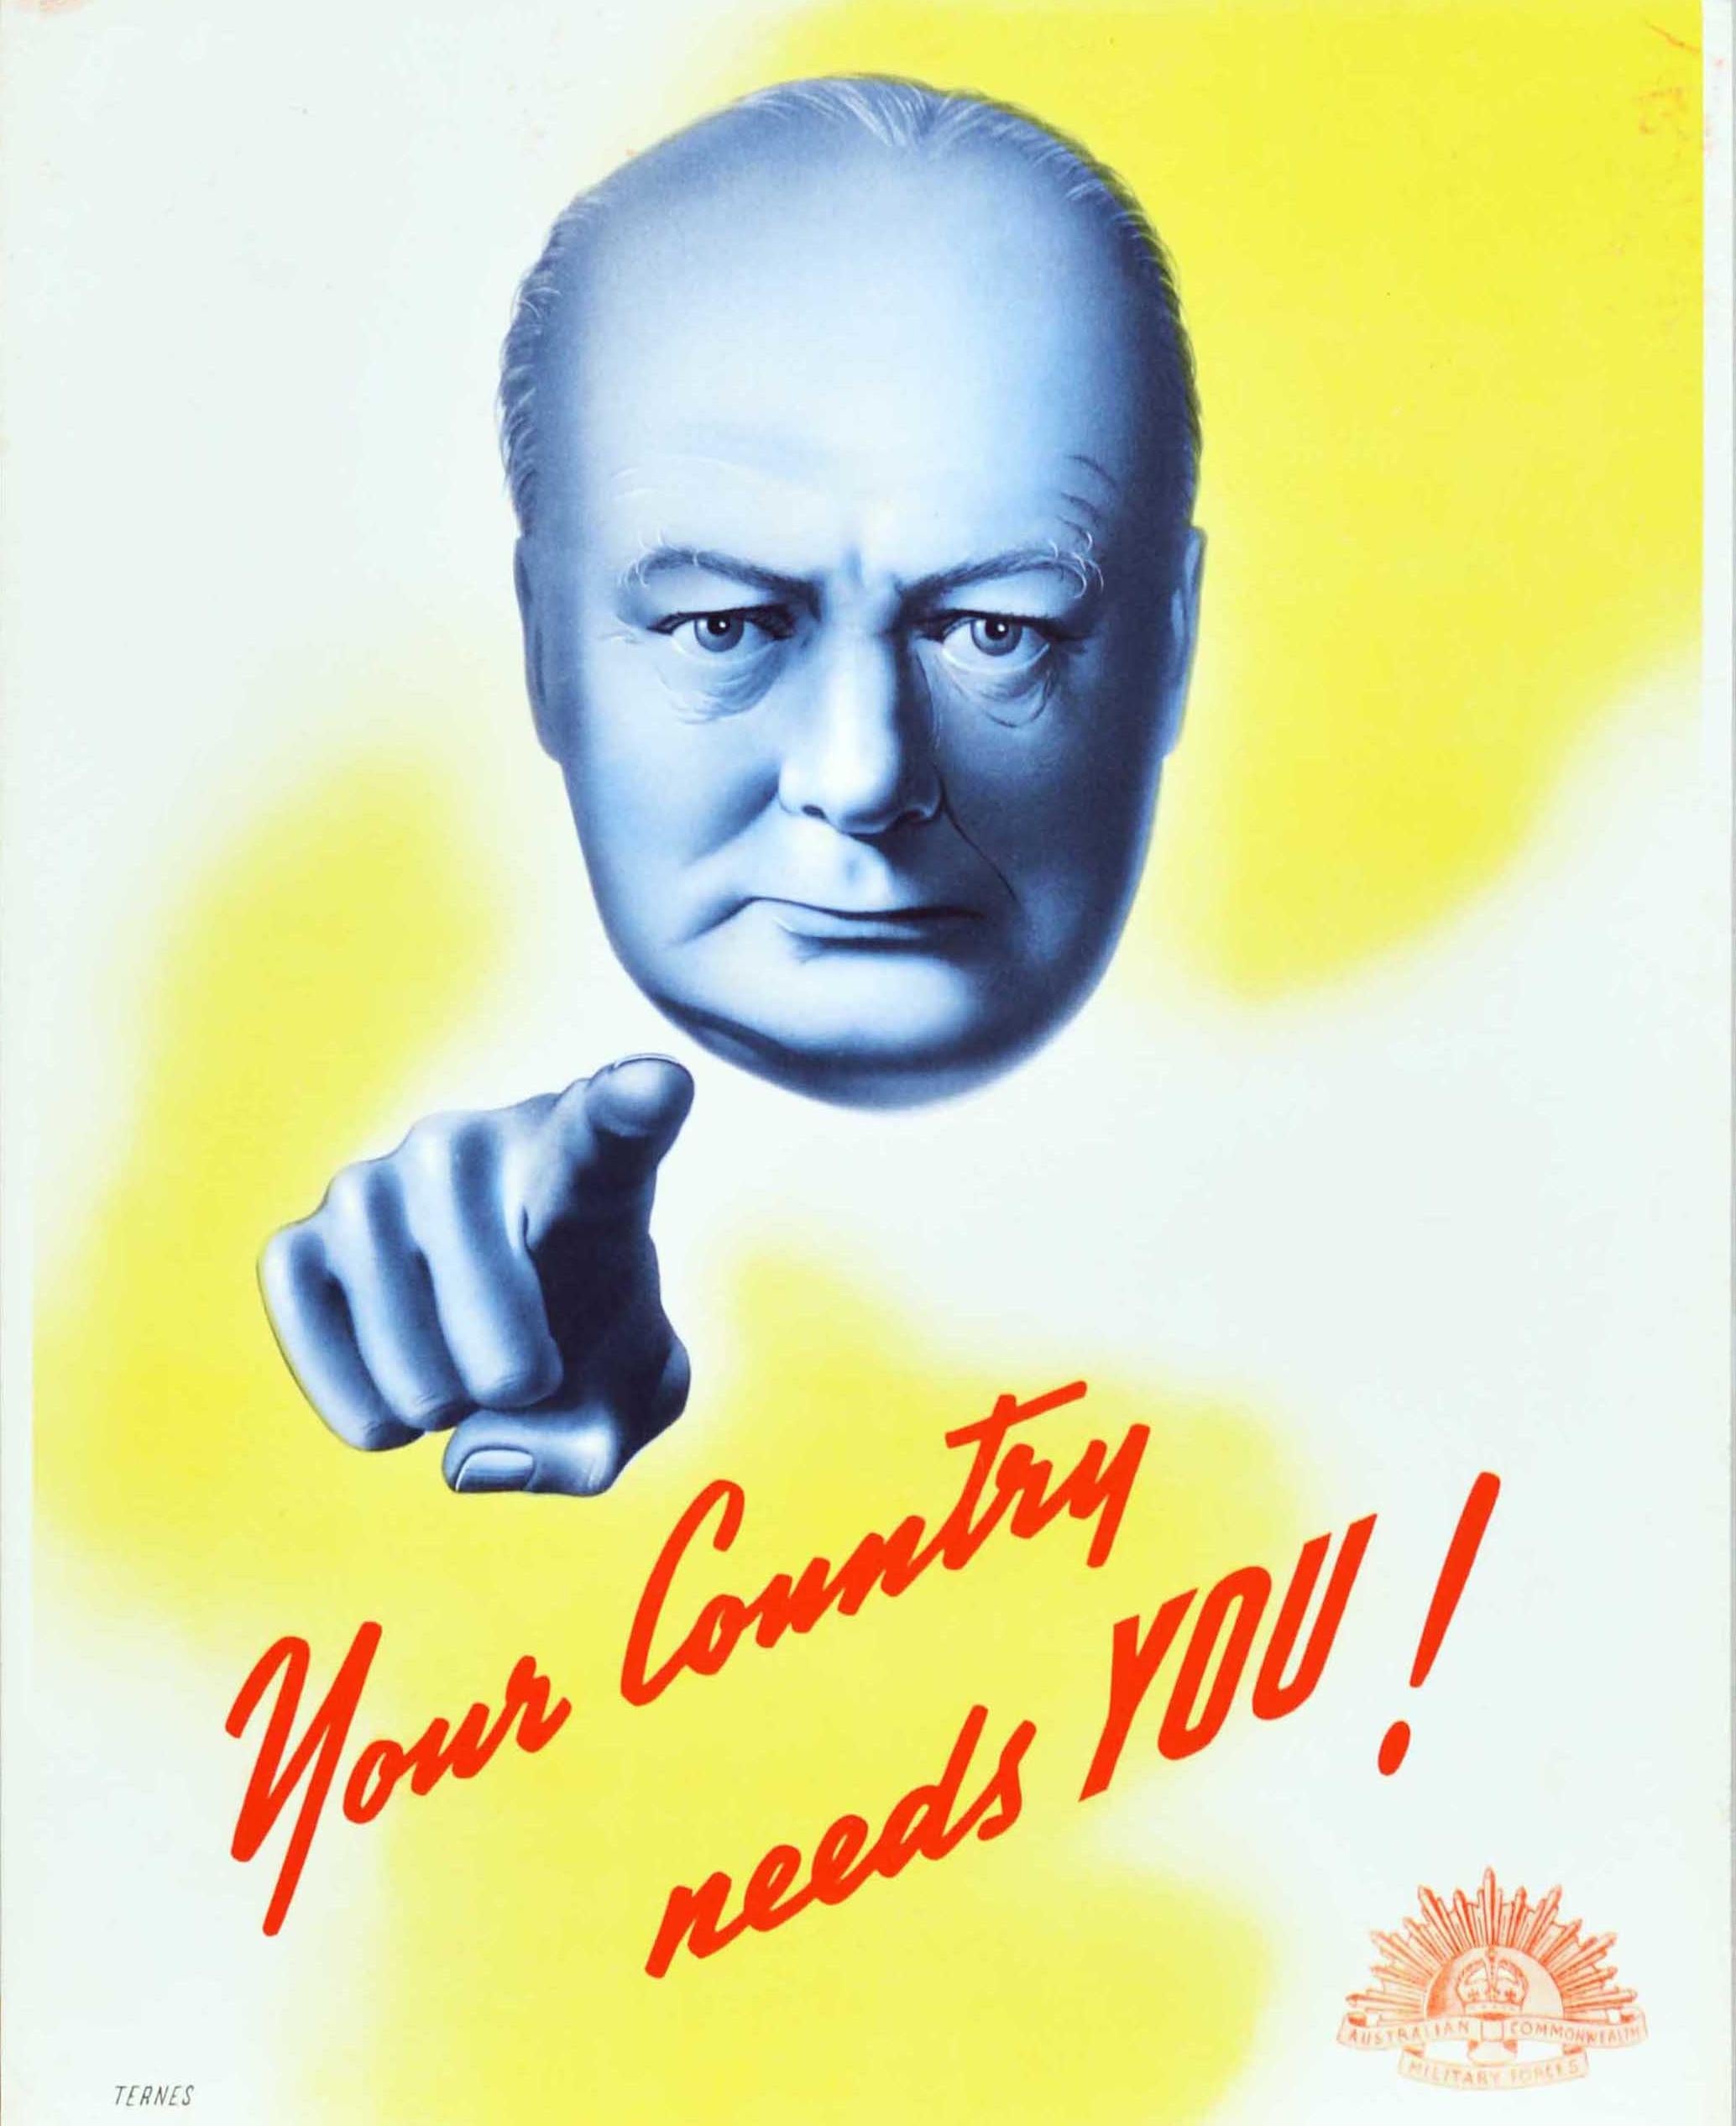 Original vintage World War Two recruitment propaganda poster for the Second Australian Imperial Force (2nd AIF; 1939-1947) voluntary military forces - Your Country needs you! Join the AIF now! Design features an image in shades of blue depicting